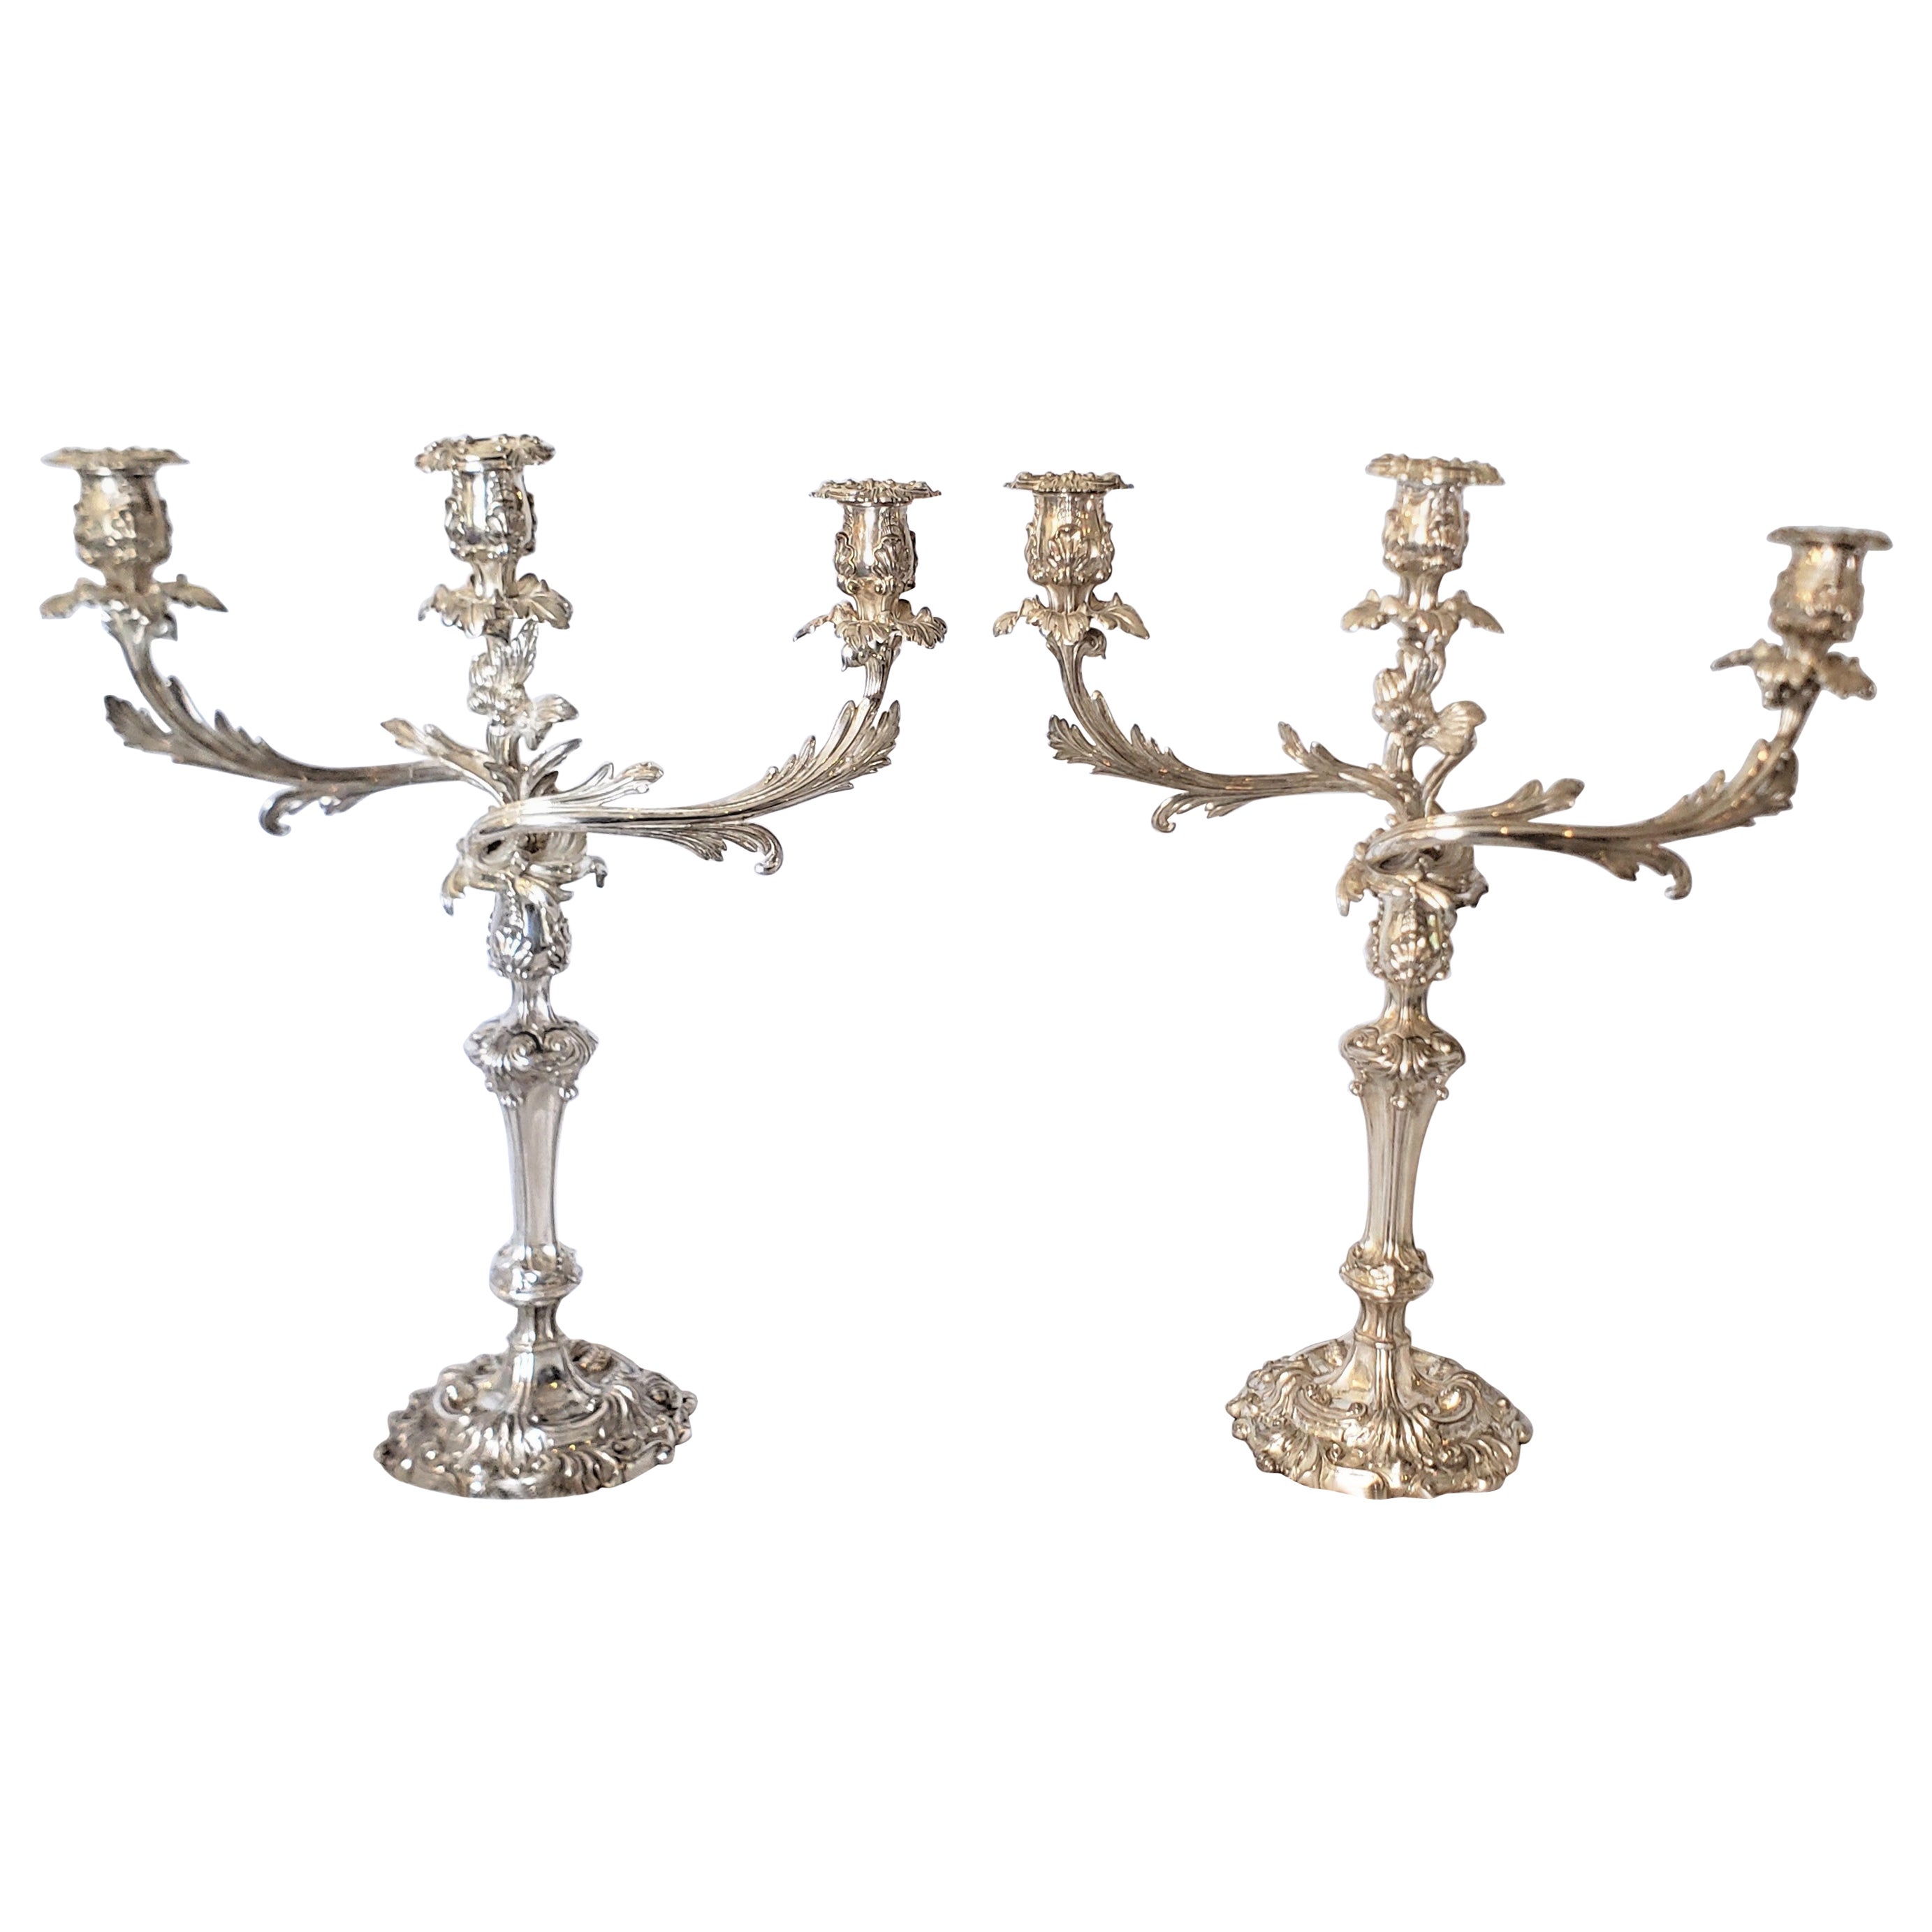 Pair of Antique Sheffield Plate Convertible 3 Branch Candlesticks or Candelabra For Sale